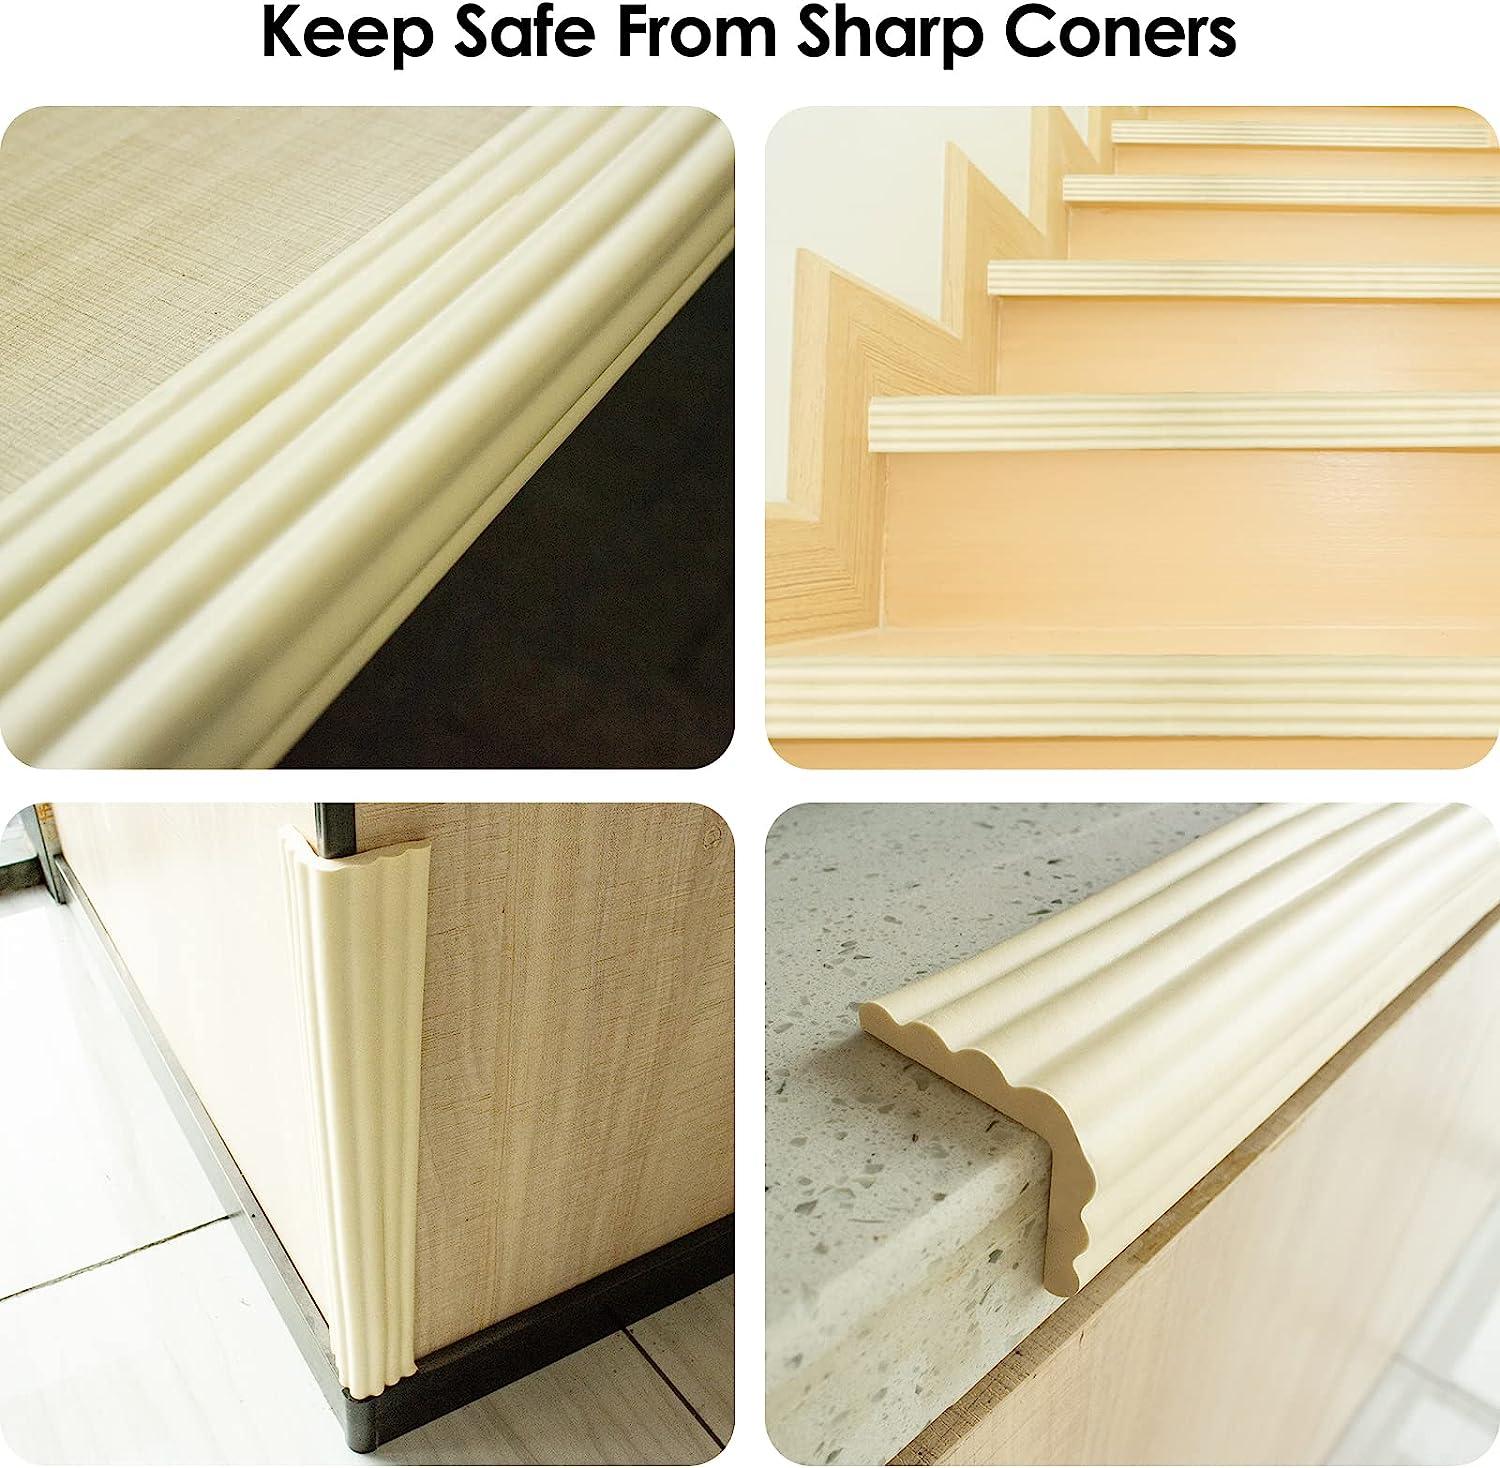 How to Baby-Proof Sharp Corners on the CHEAP!!! - Instructables